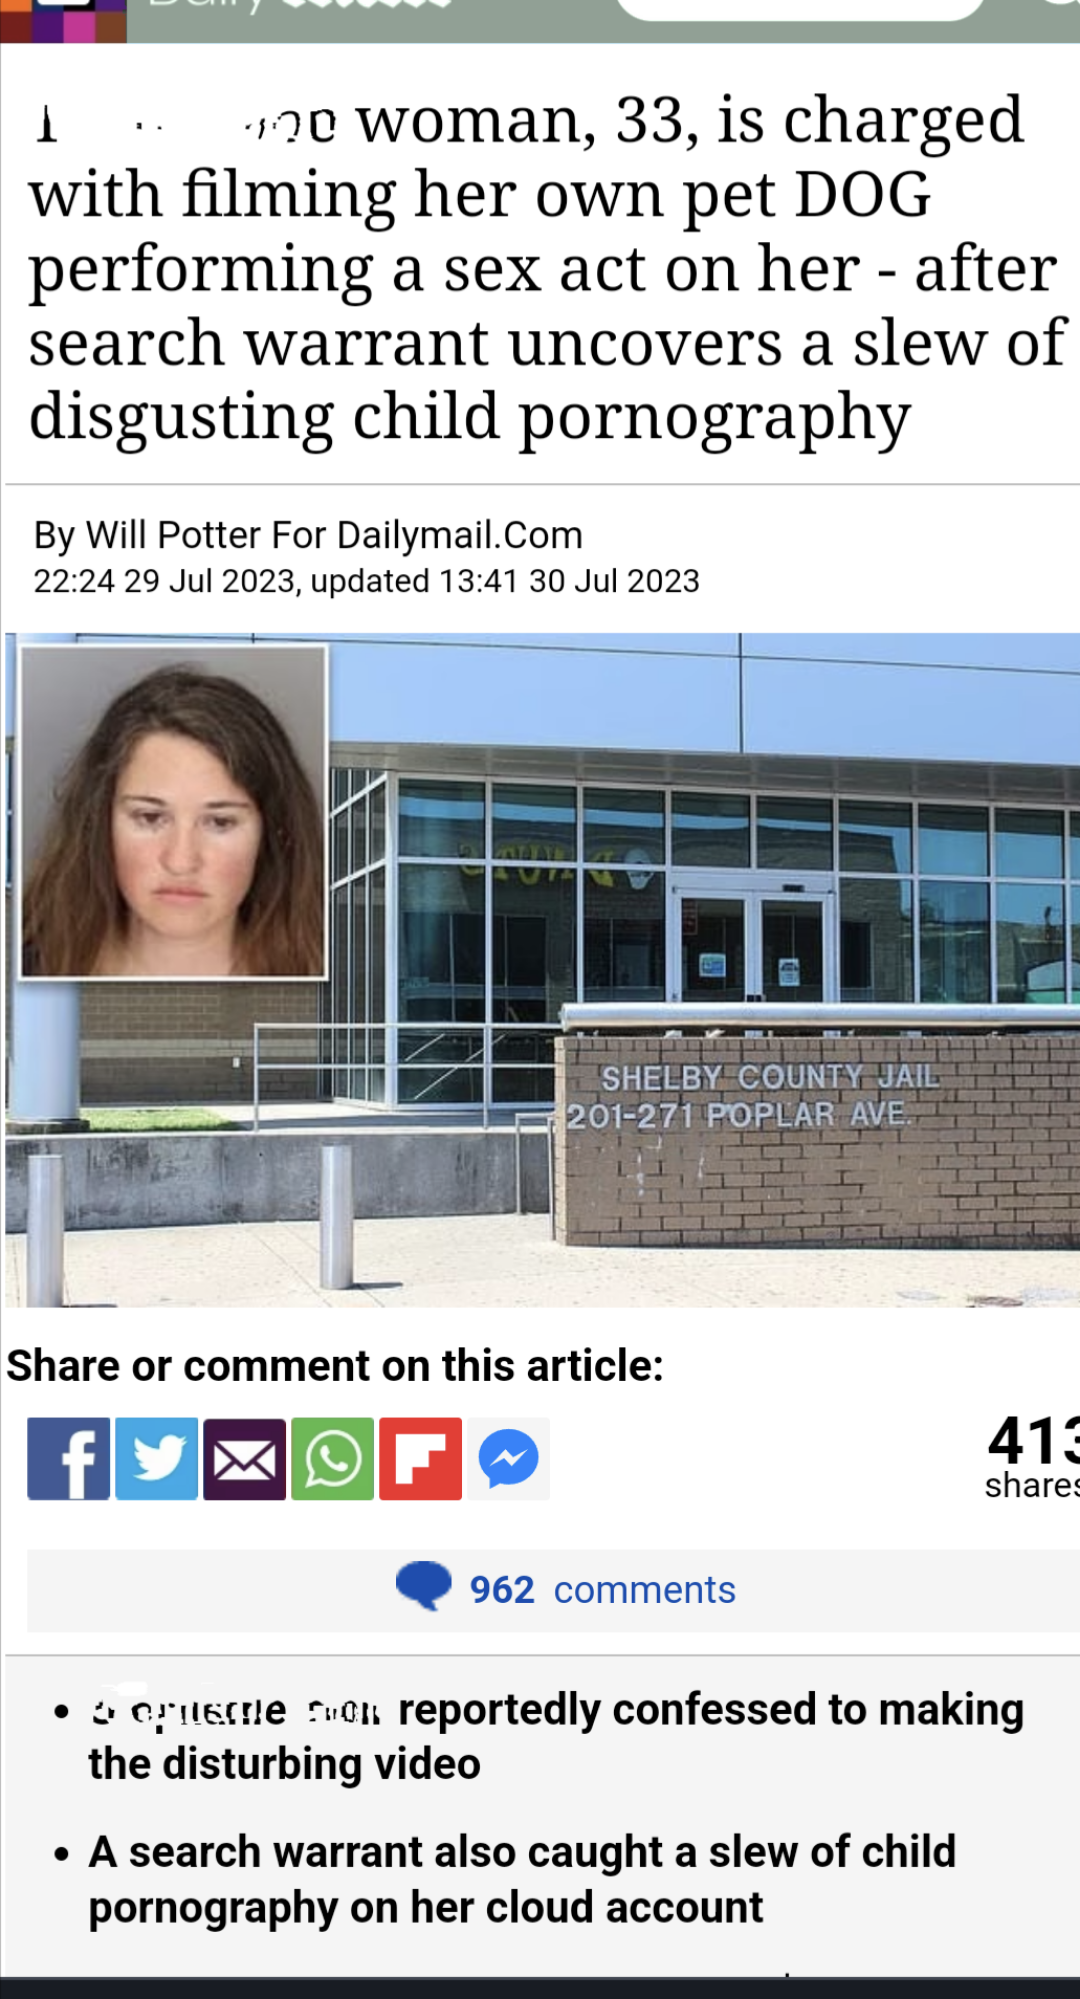 trashy people - media - e woman, 33, is charged with filming her own pet Dog performing a sex act on her after search warrant uncovers a slew of disgusting child pornography By Will Potter For Dailymail.com , updated Shelby County Jail 201274 Poplar Ave o